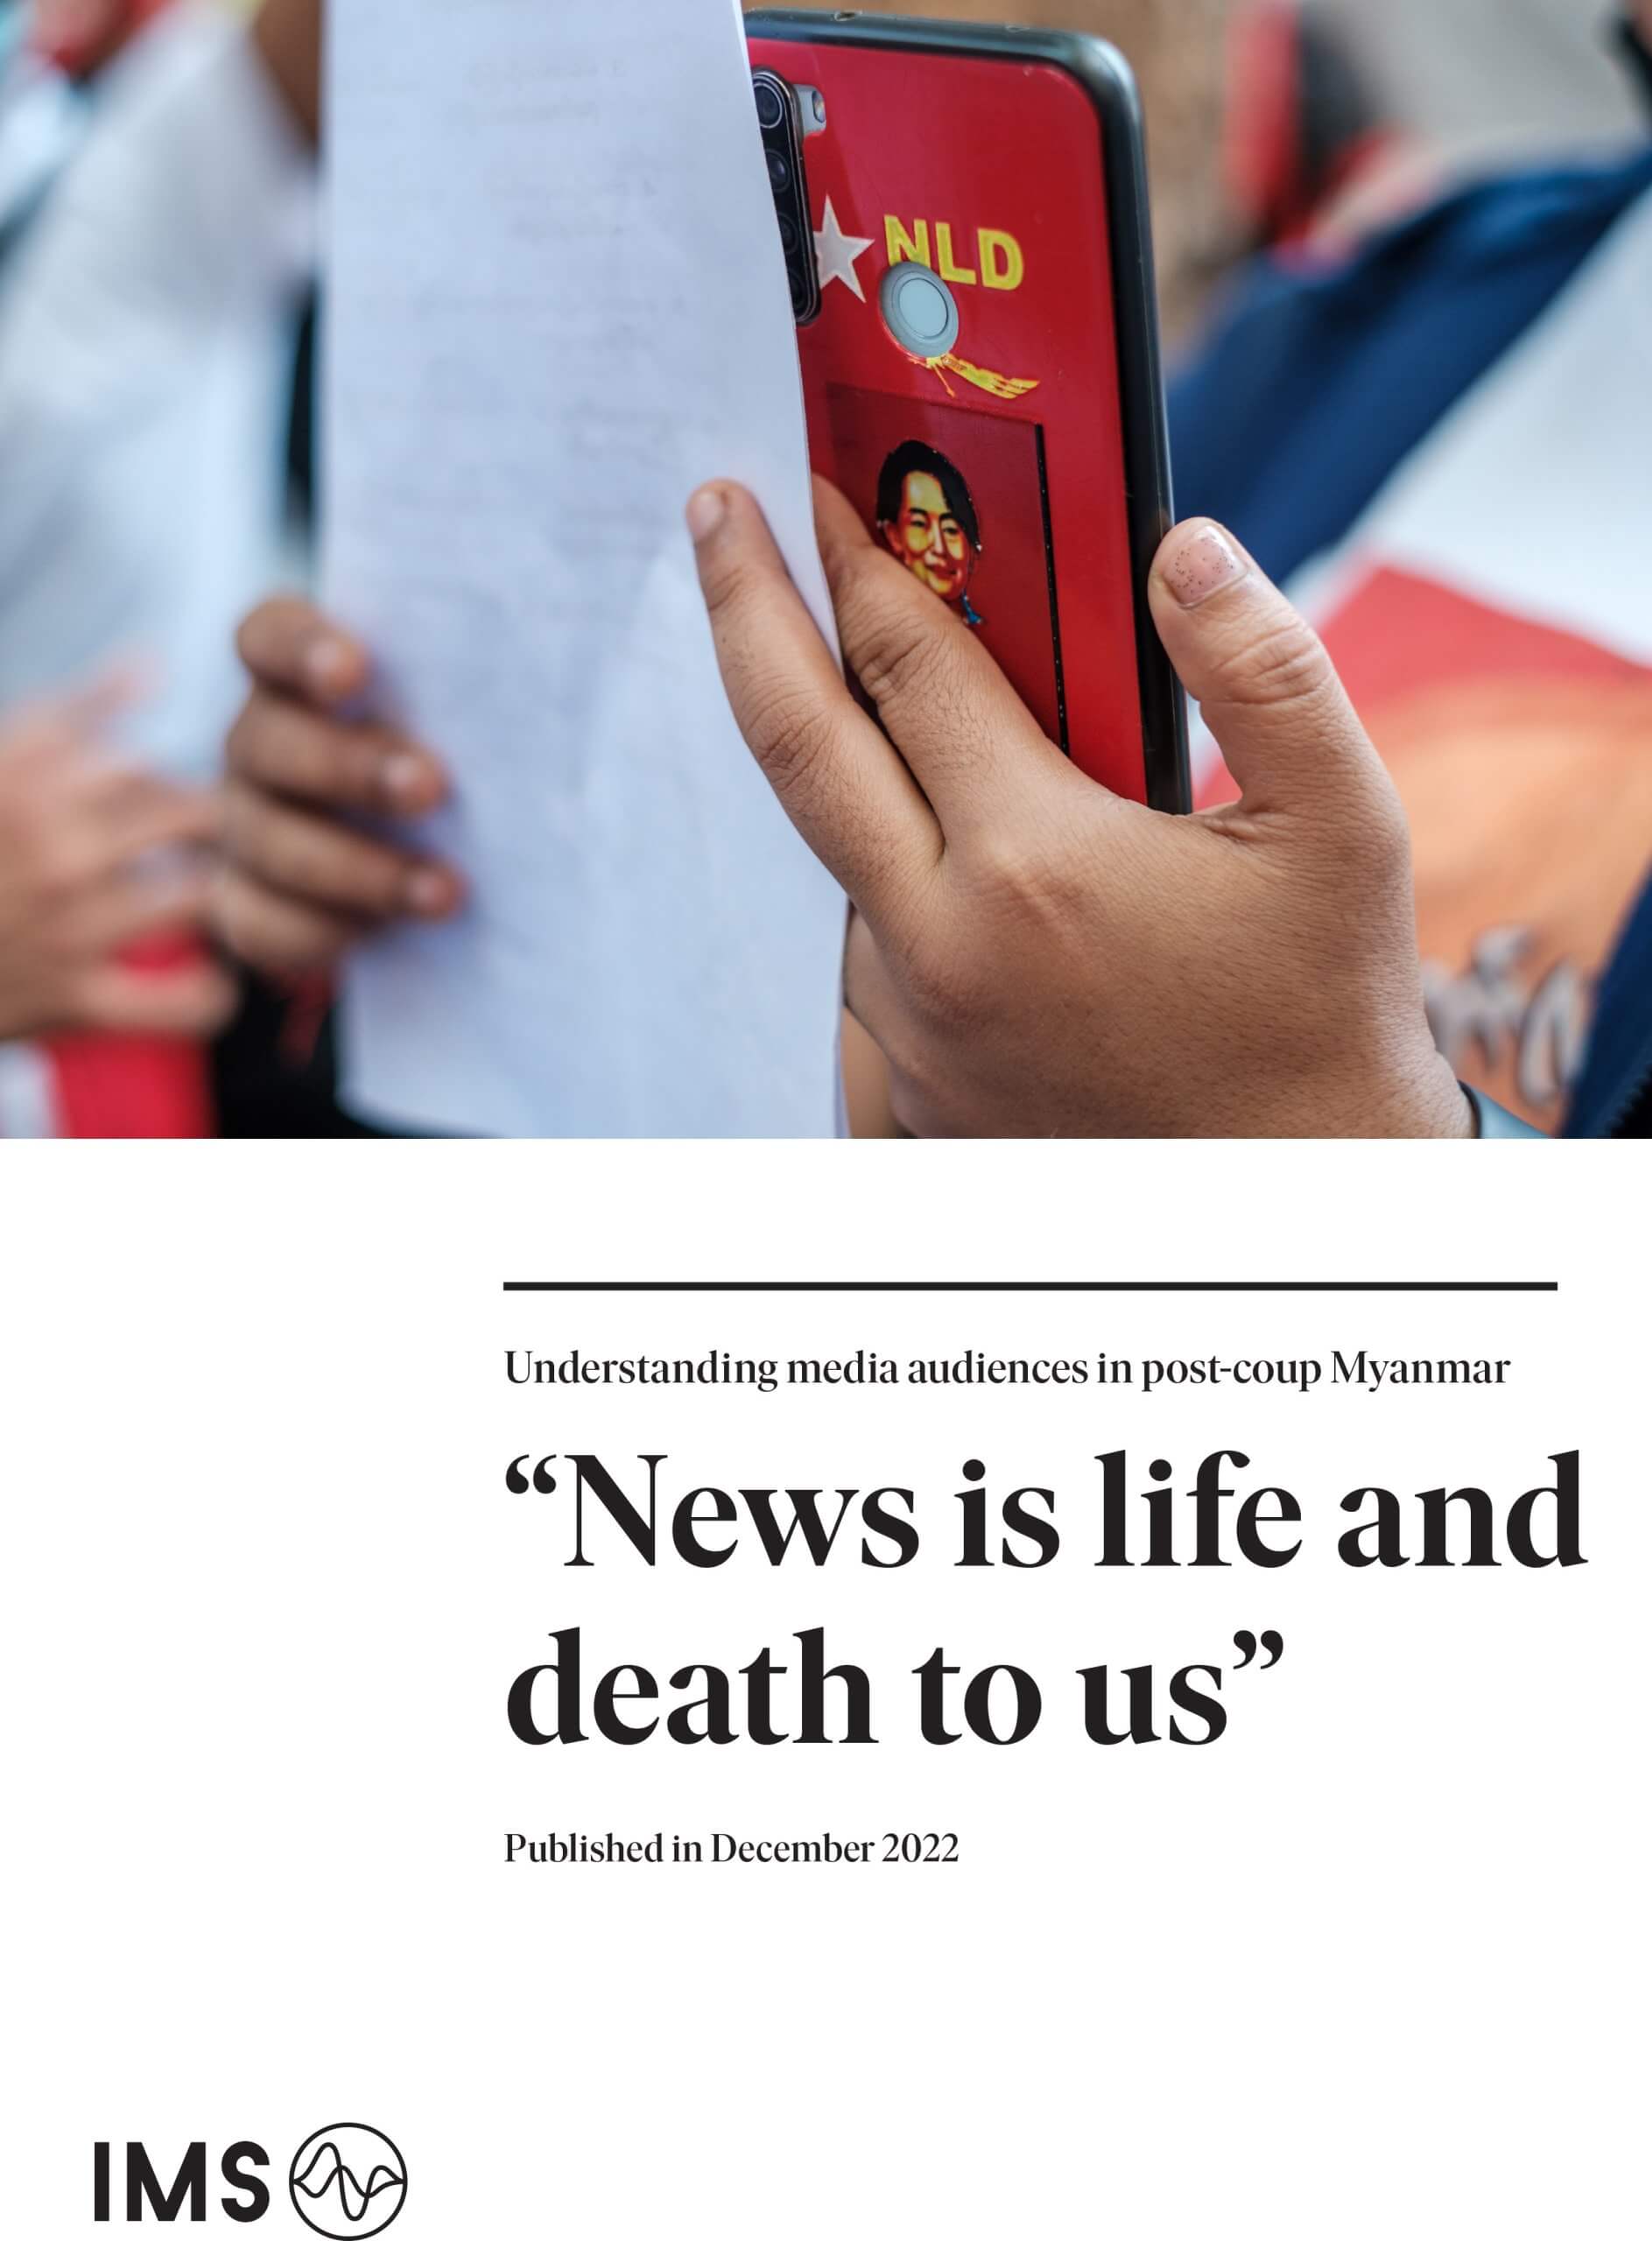 "News is life and death to us": Understanding media audiences in post-coup Myanmar